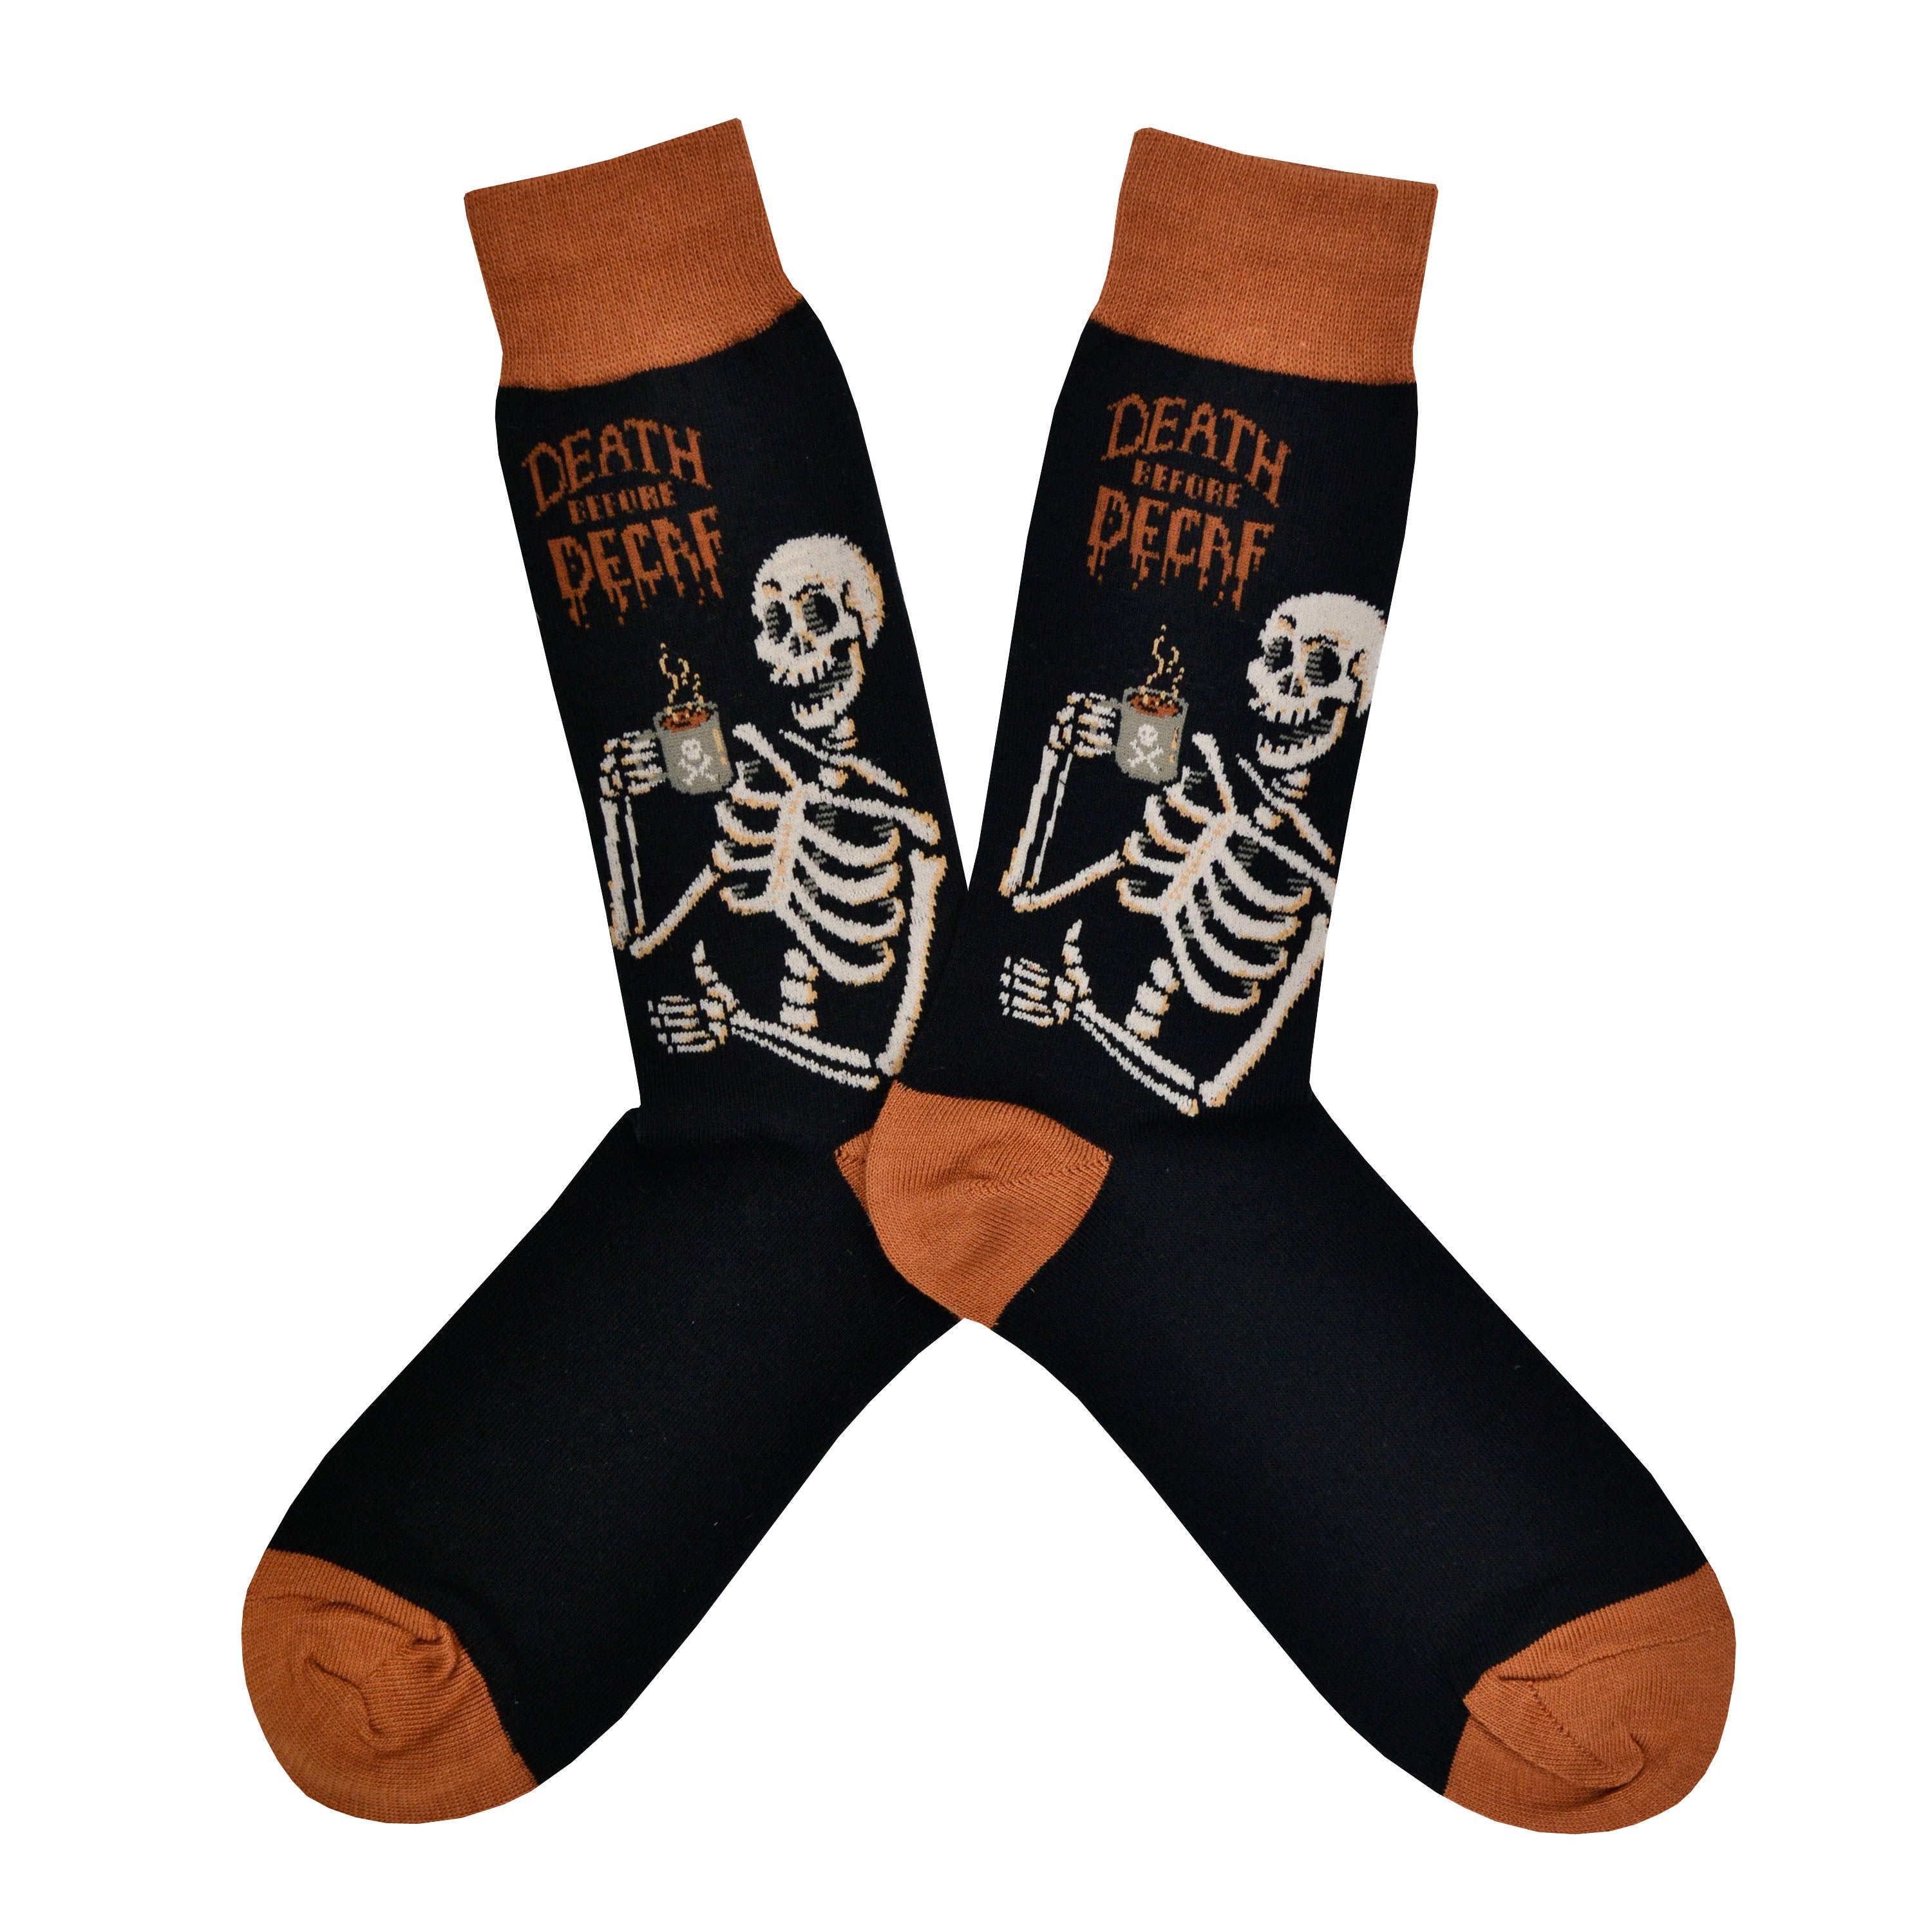 Shown in a flatlay, a pair of Socksmith's black cotton men's crew socks with brown cuff/heel/toe and a skeleton drinking coffee along with the words “Death Before Decaf”